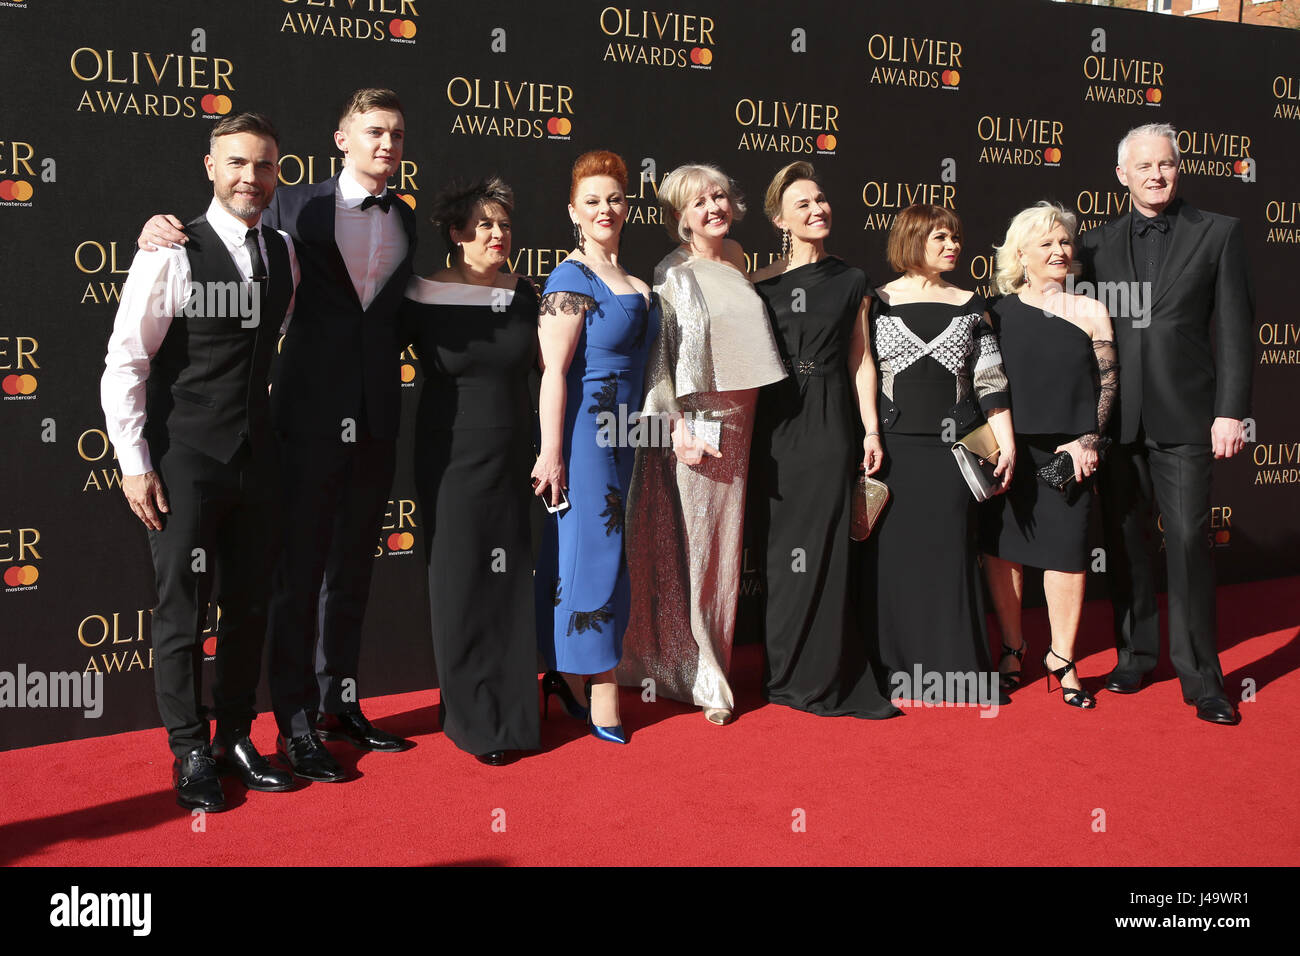 The Olivier Awards 2017 held at the Royal Albert Hall - Arrivals  Featuring: Gary Barlow, Tim Frith, Claire Moore, Claire Machin, Debbie Chazen, Joanna Riding, Sophie-Louise Dann, Michele Dotrice Where: London, United Kingdom When: 09 Apr 2017 Credit: Lia Toby/WENN.com Stock Photo